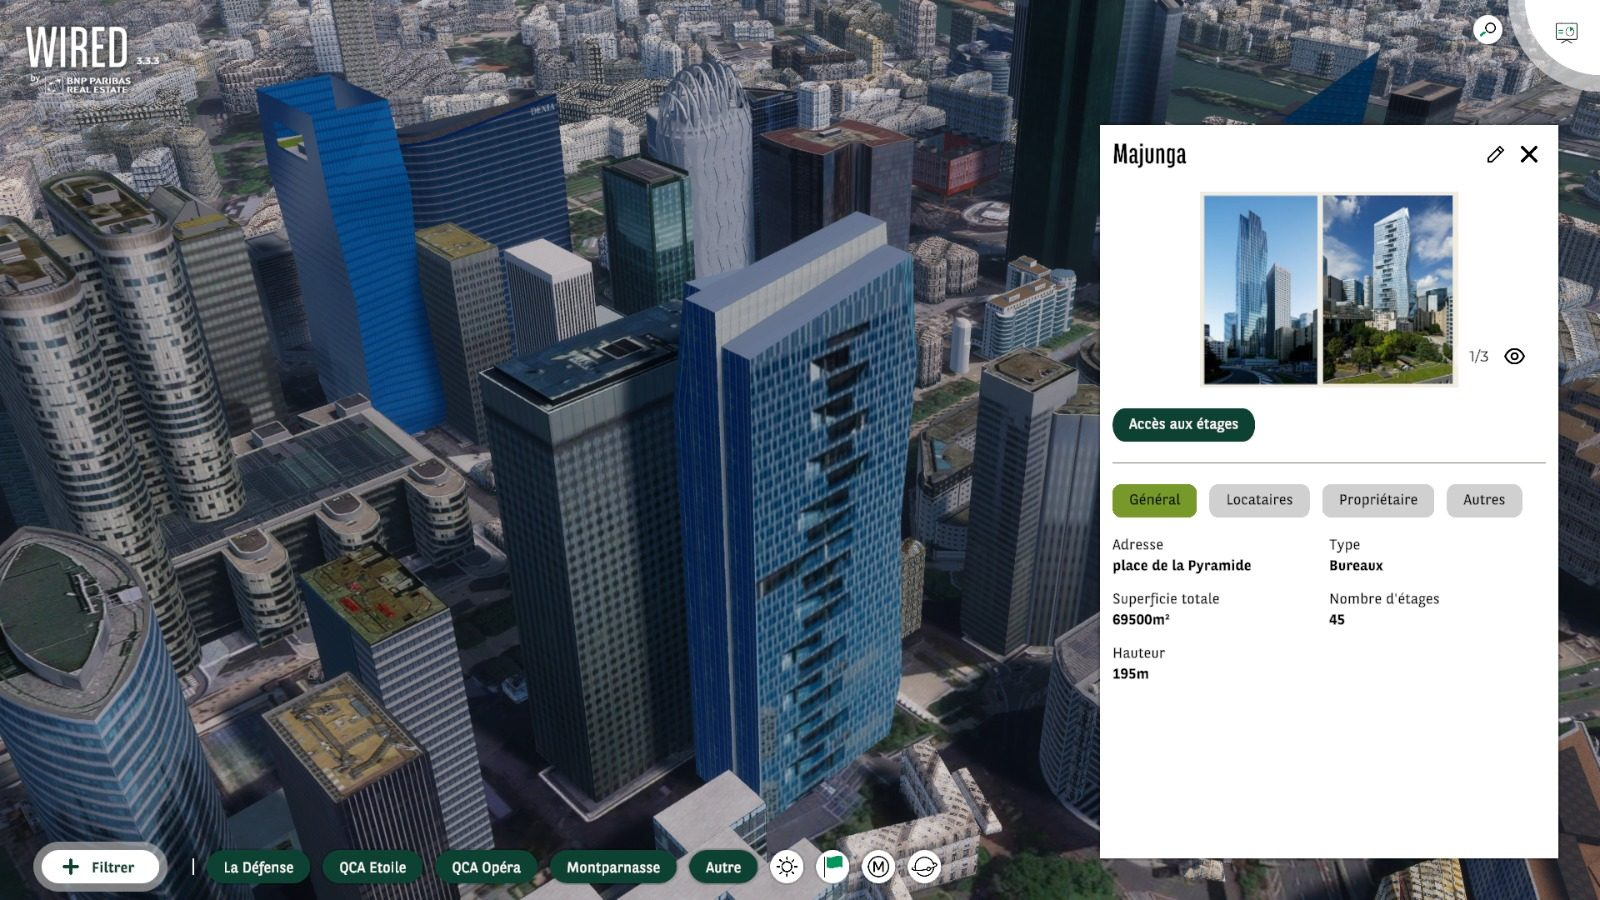 VIVATECH 2021: BNP PARIBAS REAL ESTATE LAUNCHES WIRED, THE FIRST IMMERSIVE REAL ESTATE DATA ANALYSIS TOOL